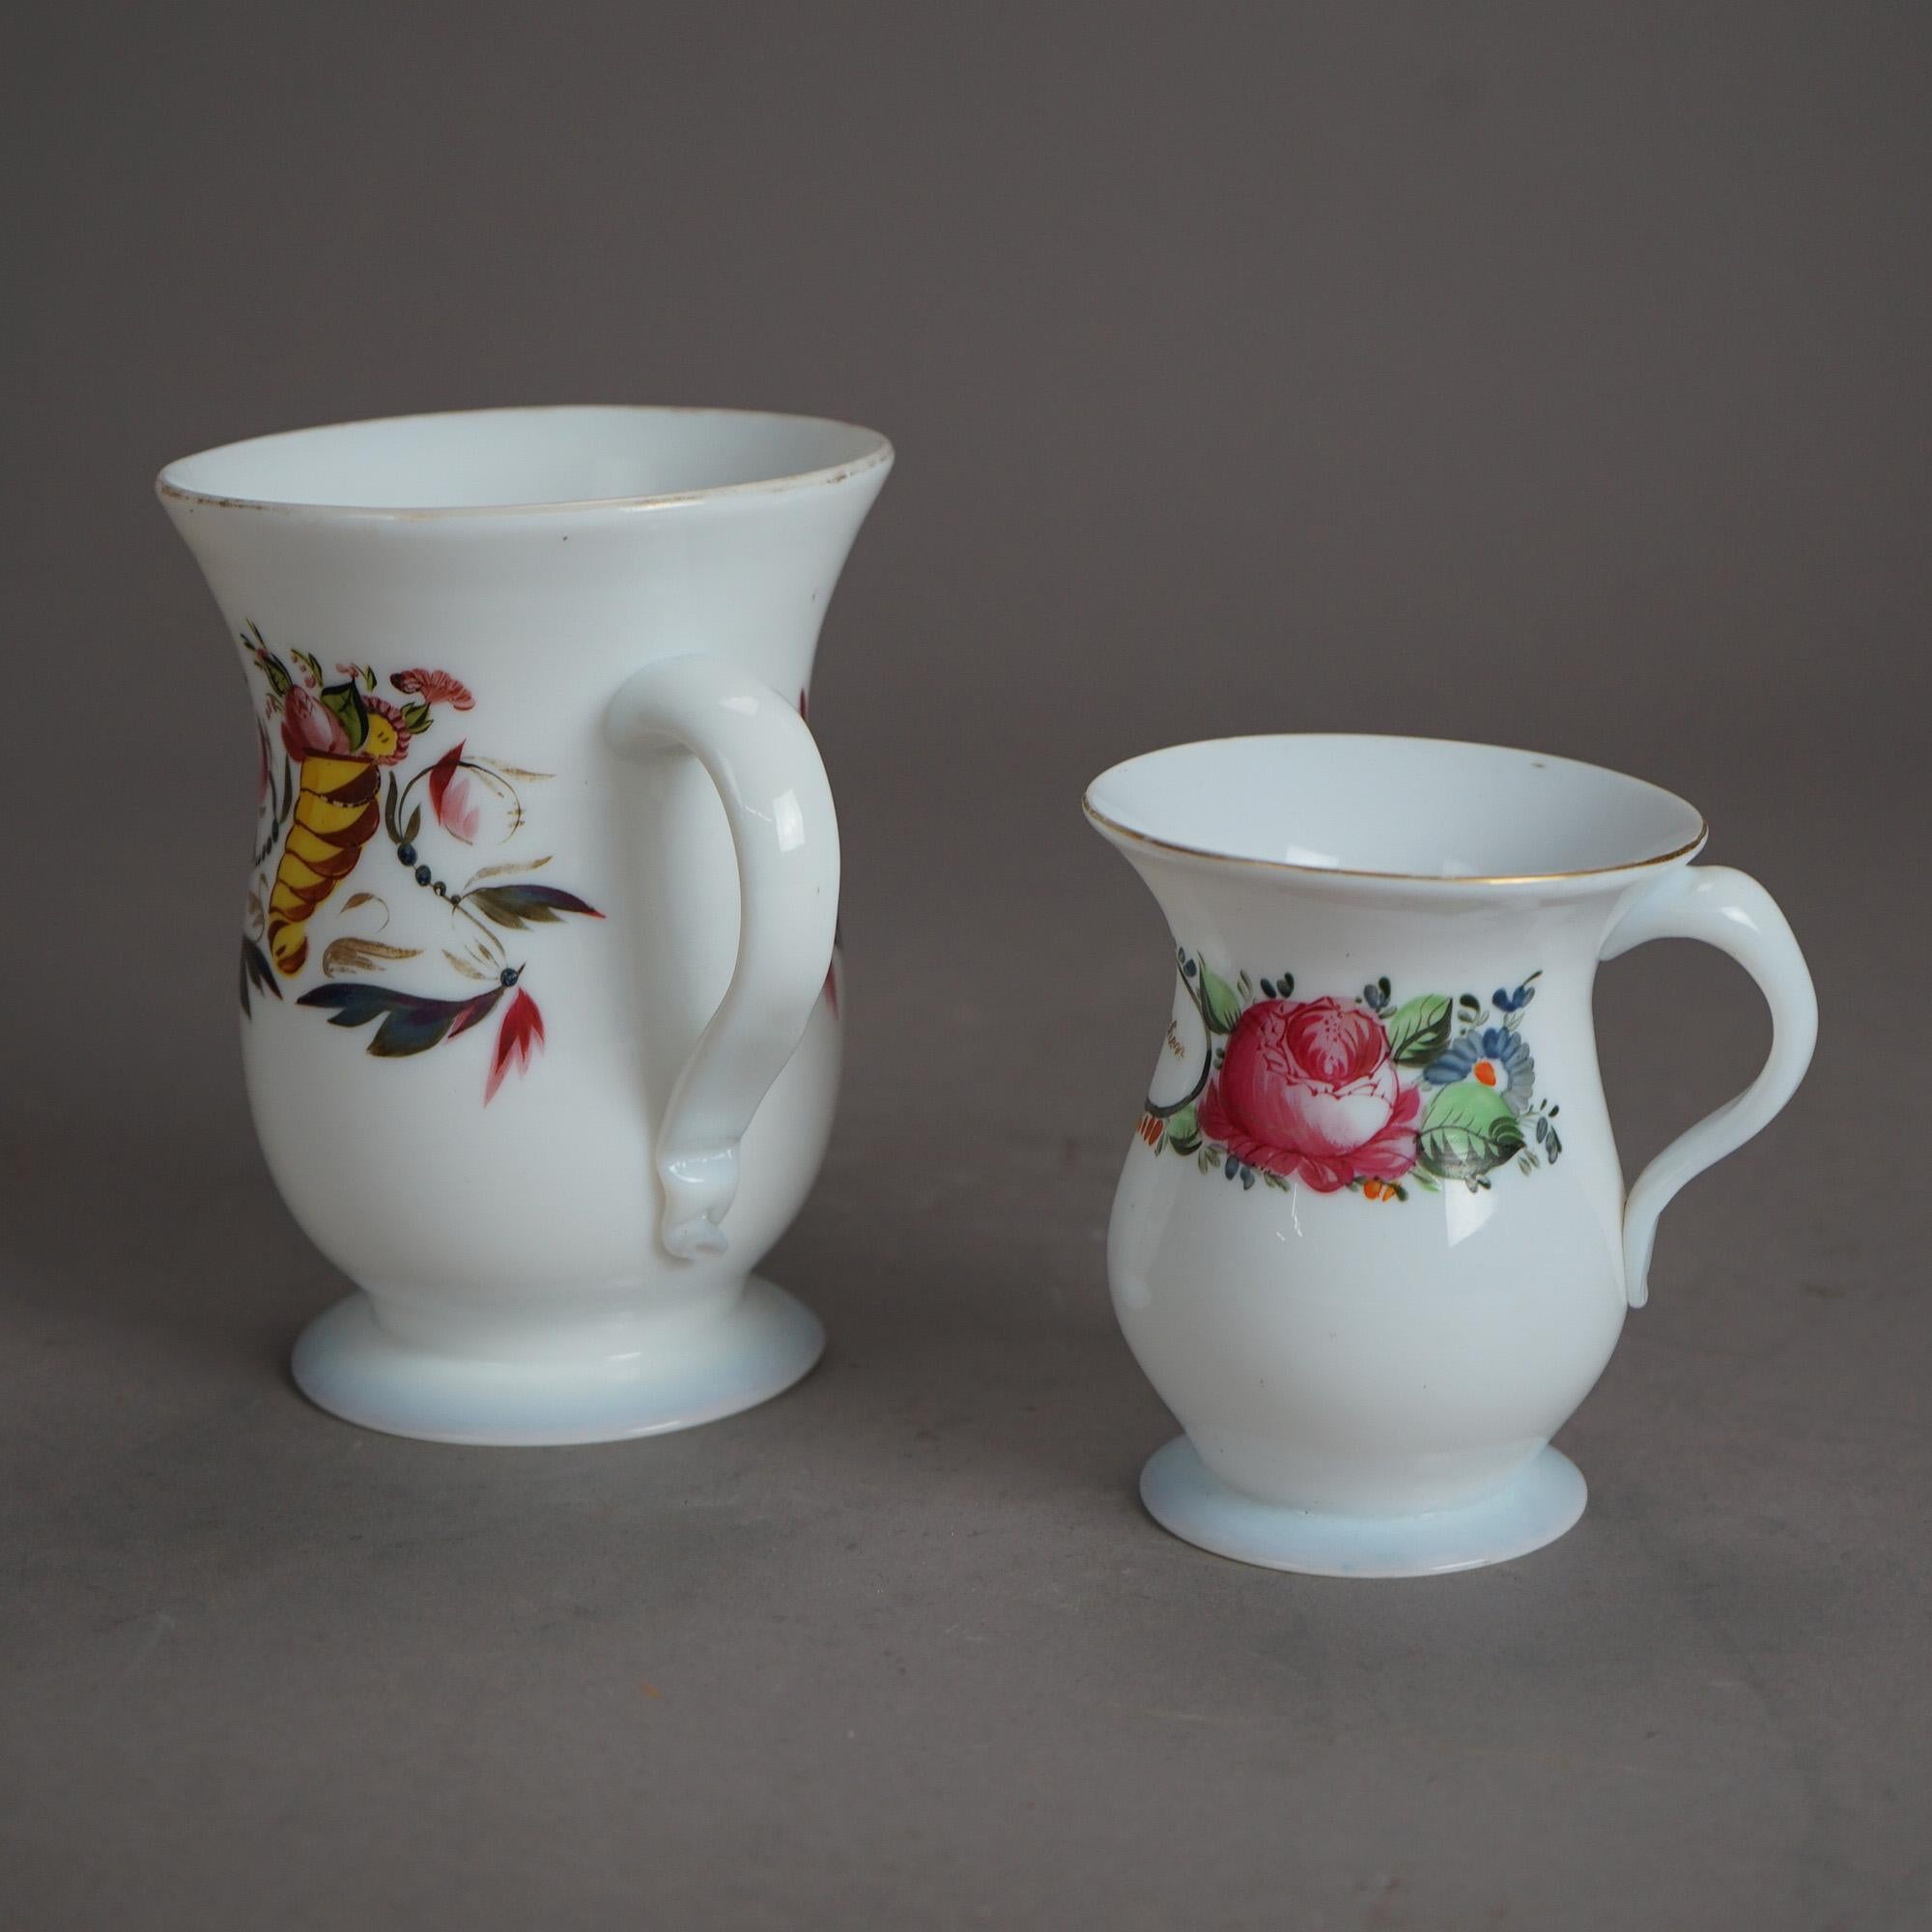 Enameled Two Early Antique Enamel & Gilt Decorated Opaline Glass Mugs 18th C